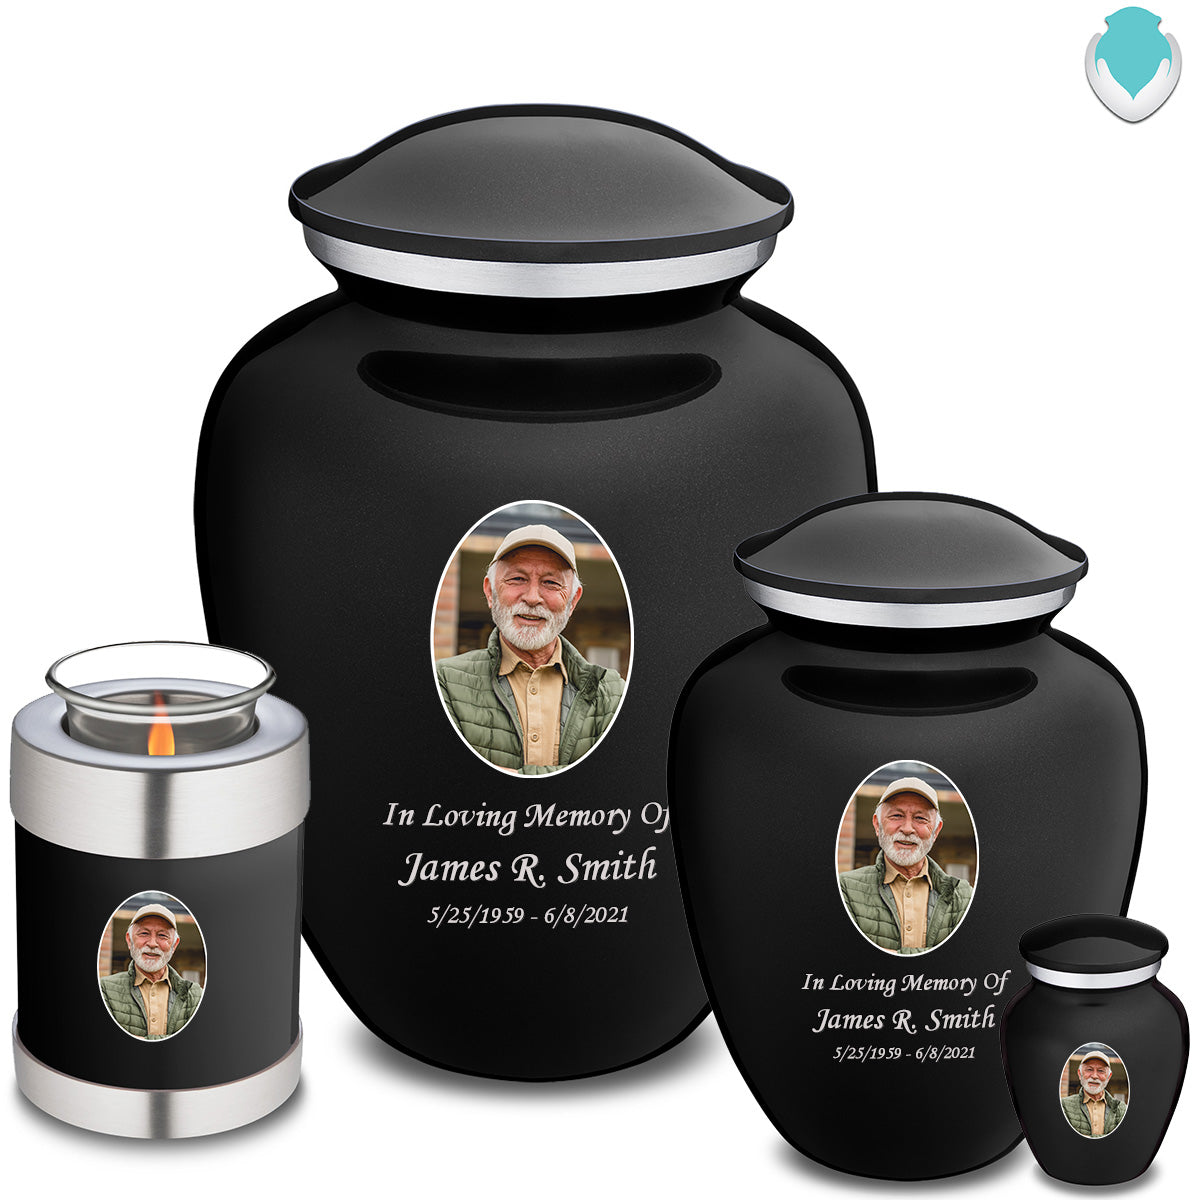 Cremation Urns For Human Ashes, Cremation Urns For Sale